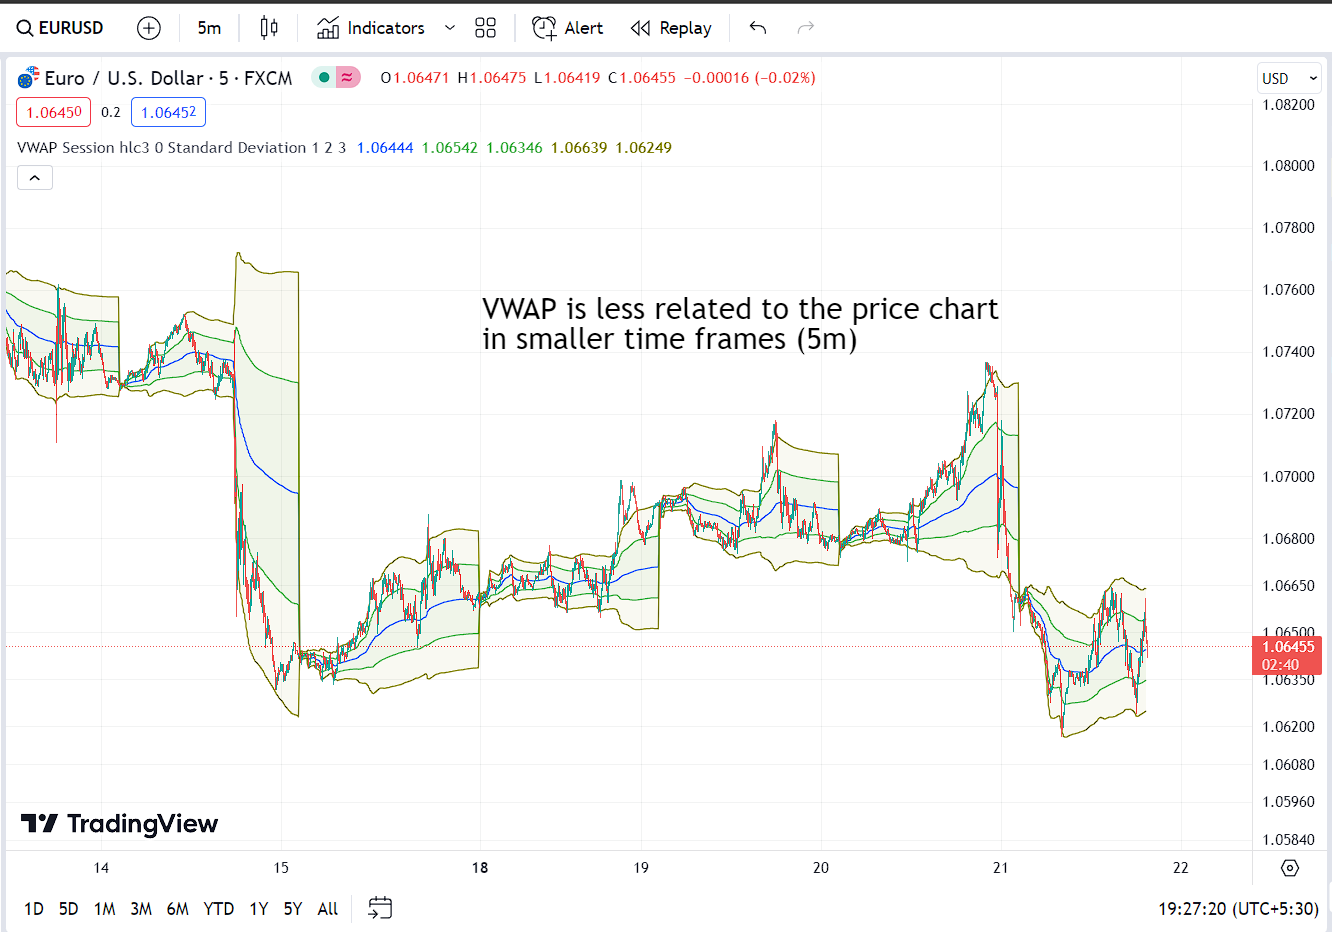 VWAP in small time frames